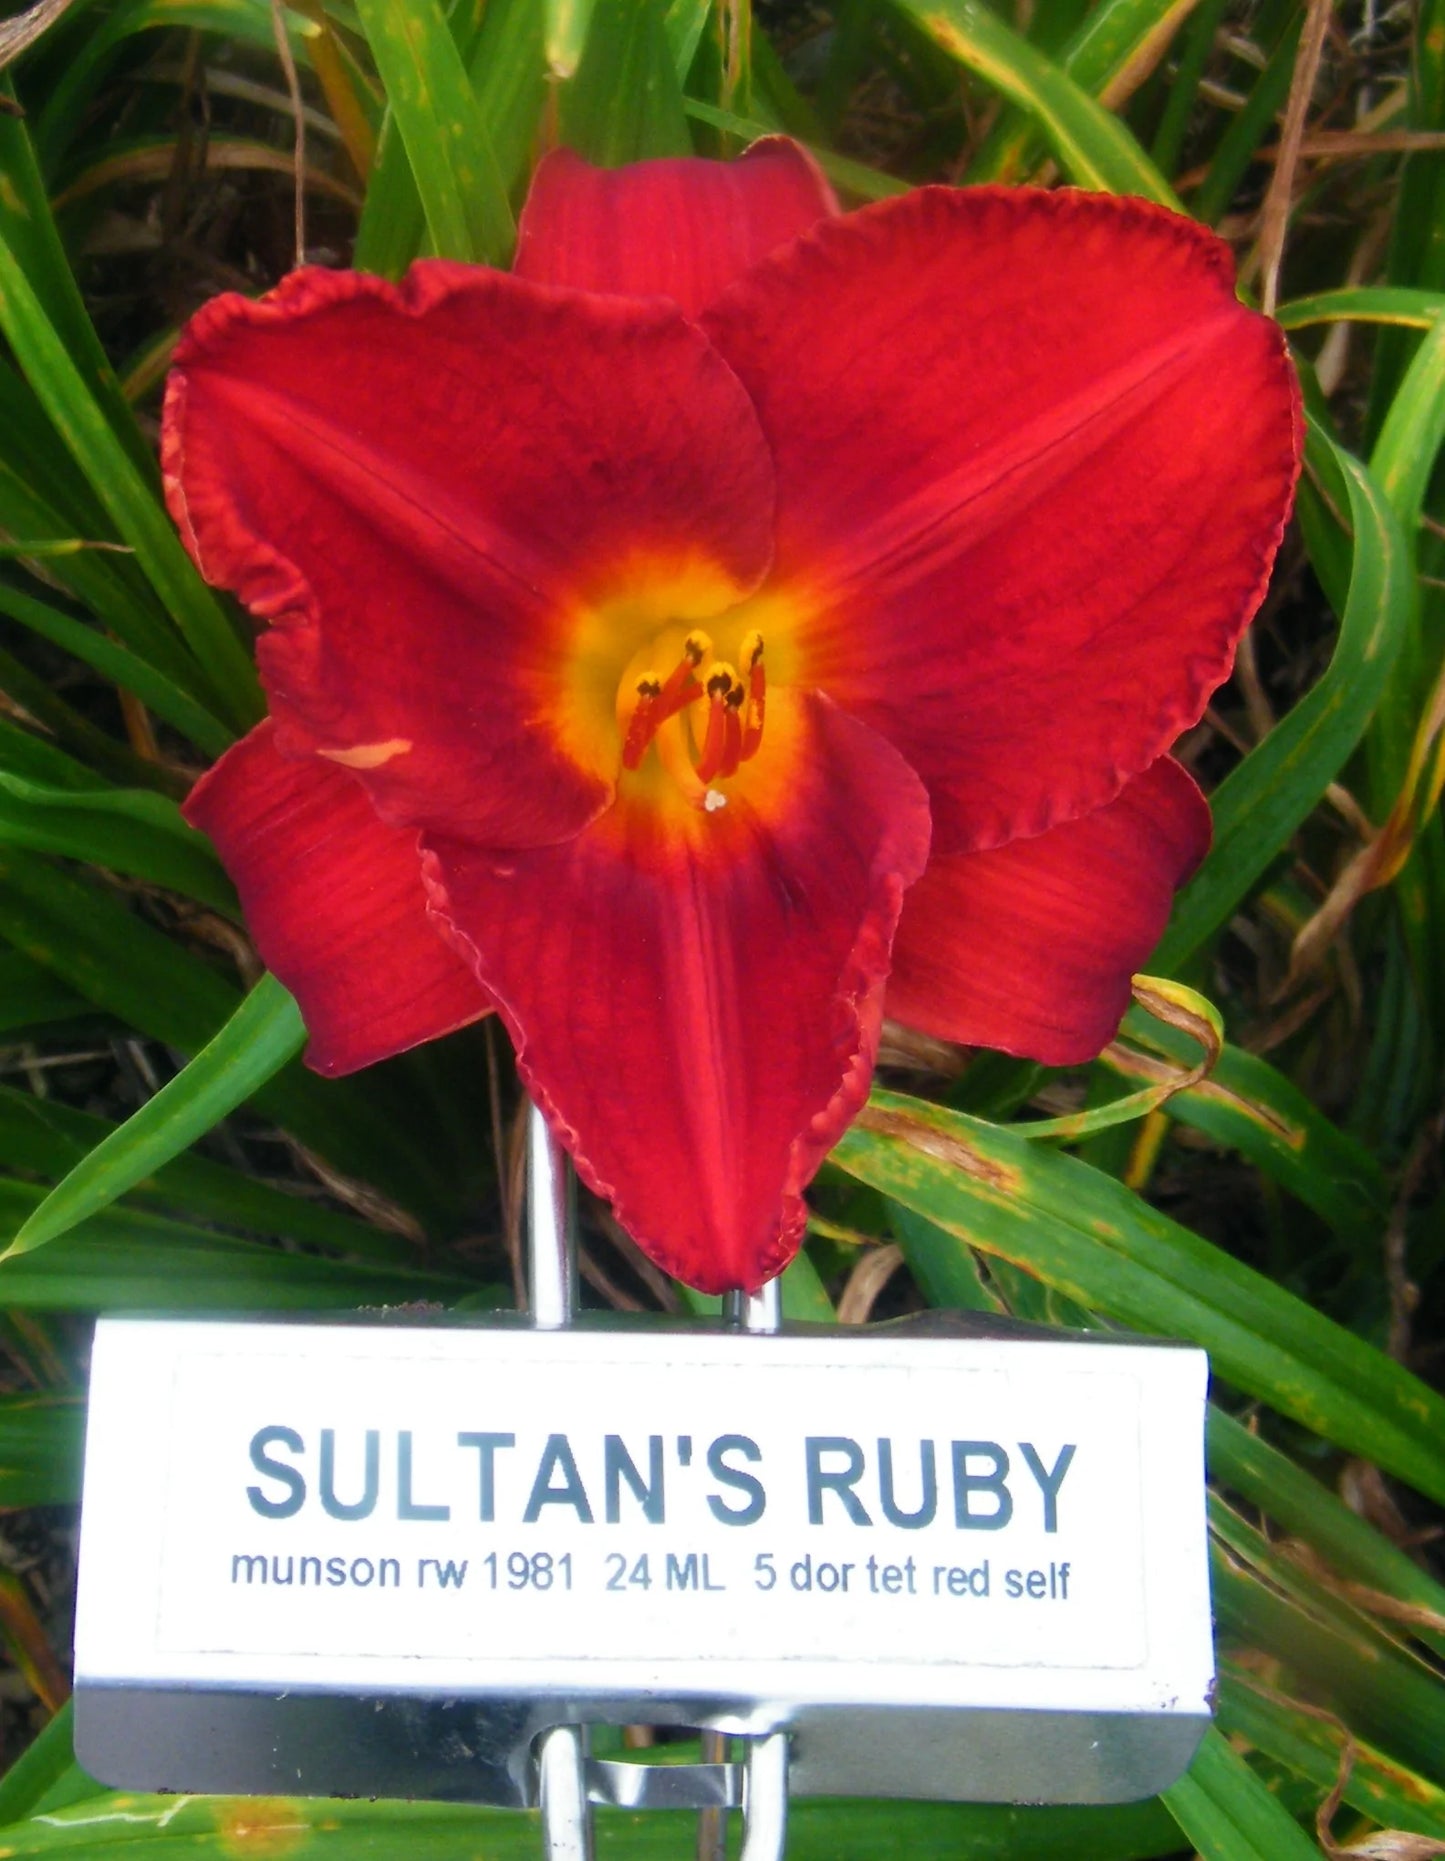 SULTANS RUBY